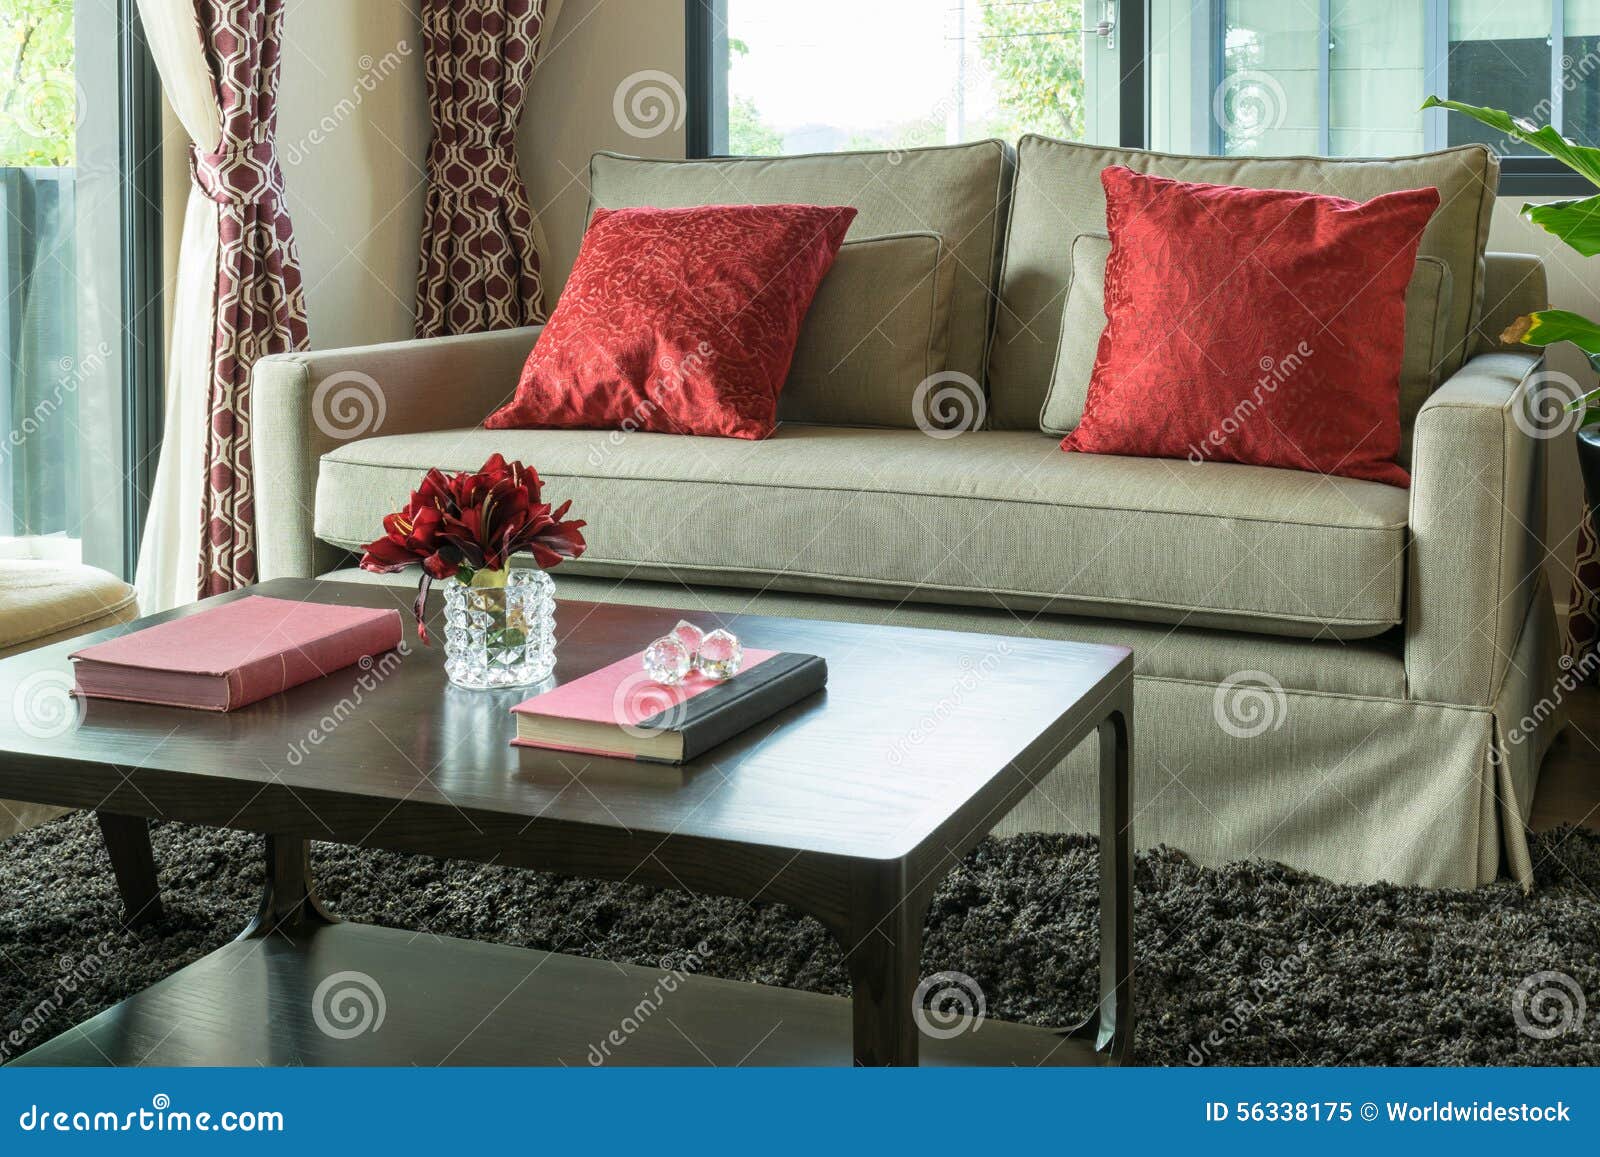 Living Room with Red Pillows on Sofa Stock Image - Image of elegance ...